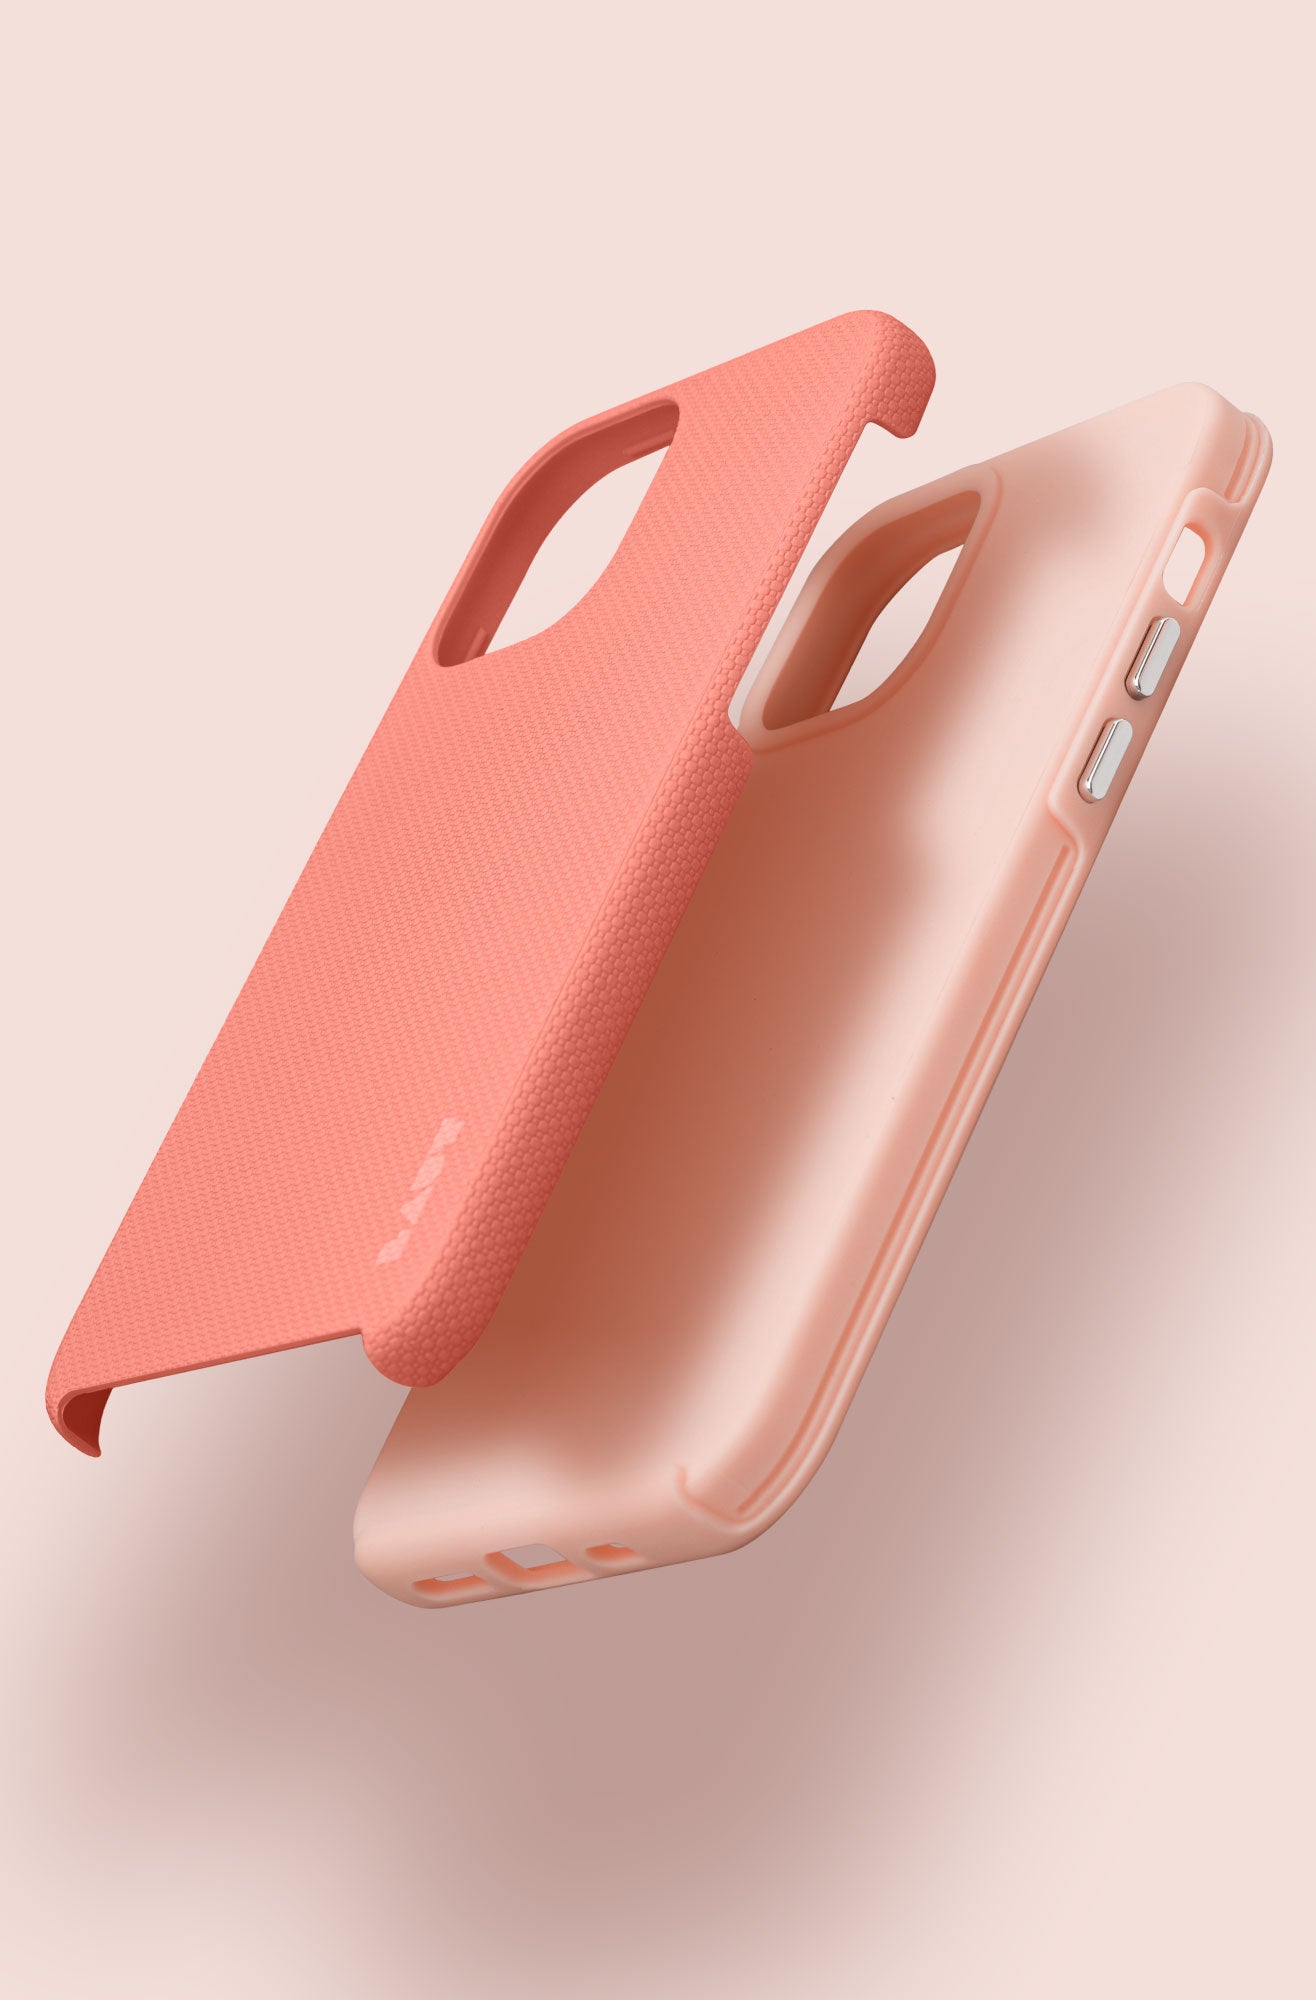 LAUT - SHIELD case for iPhone 12 series